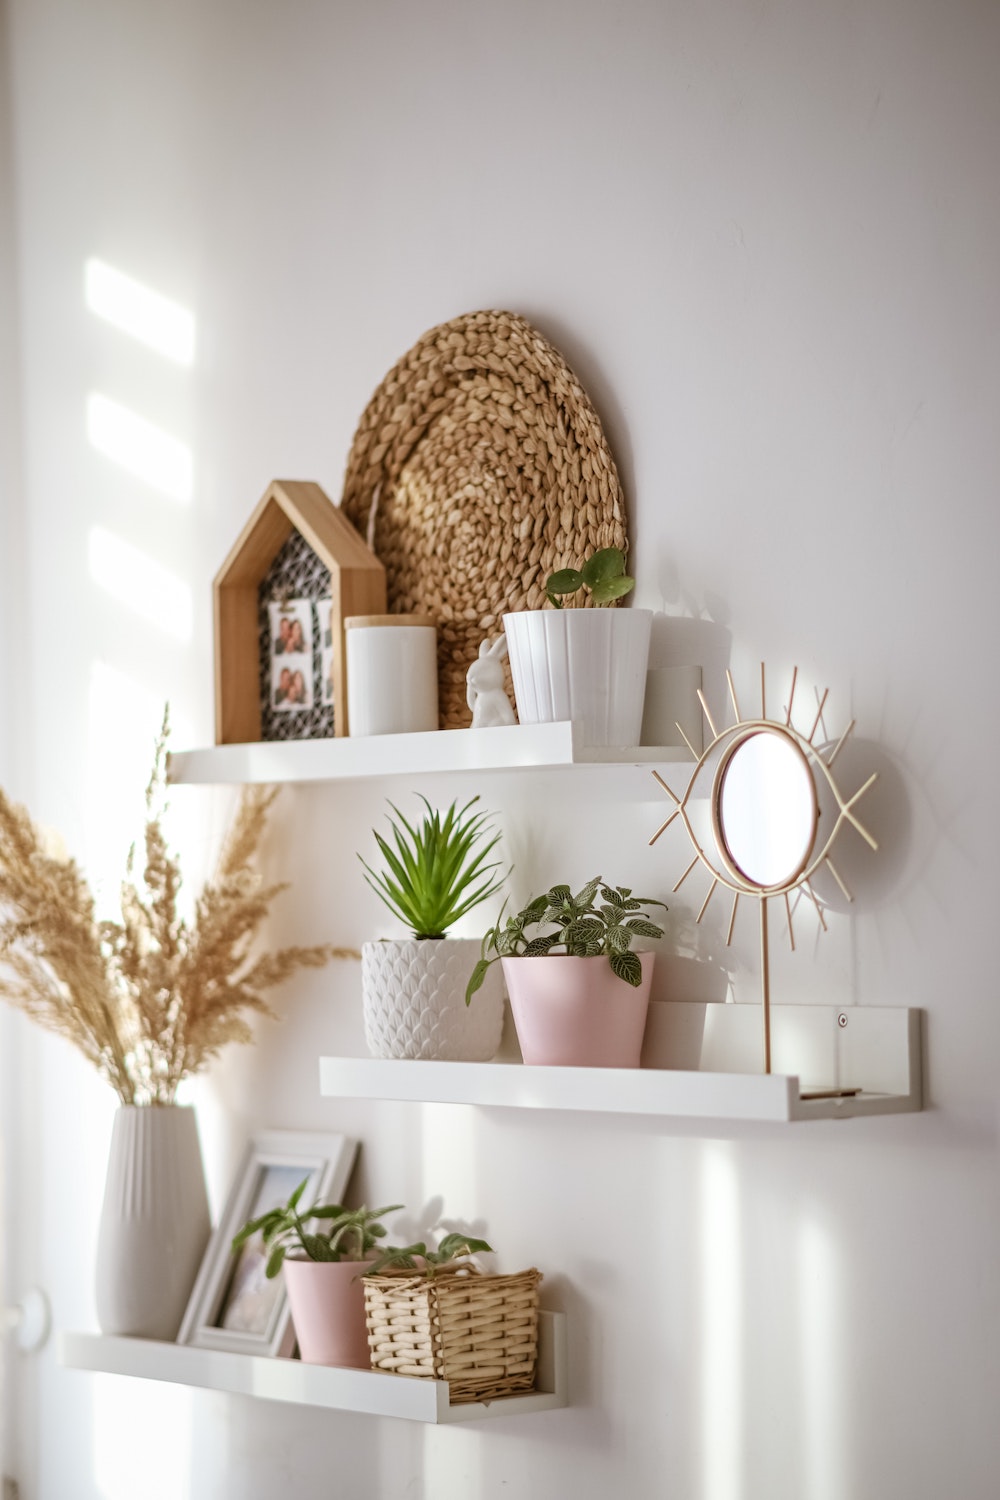 Wall-mounted shelves for more home storage